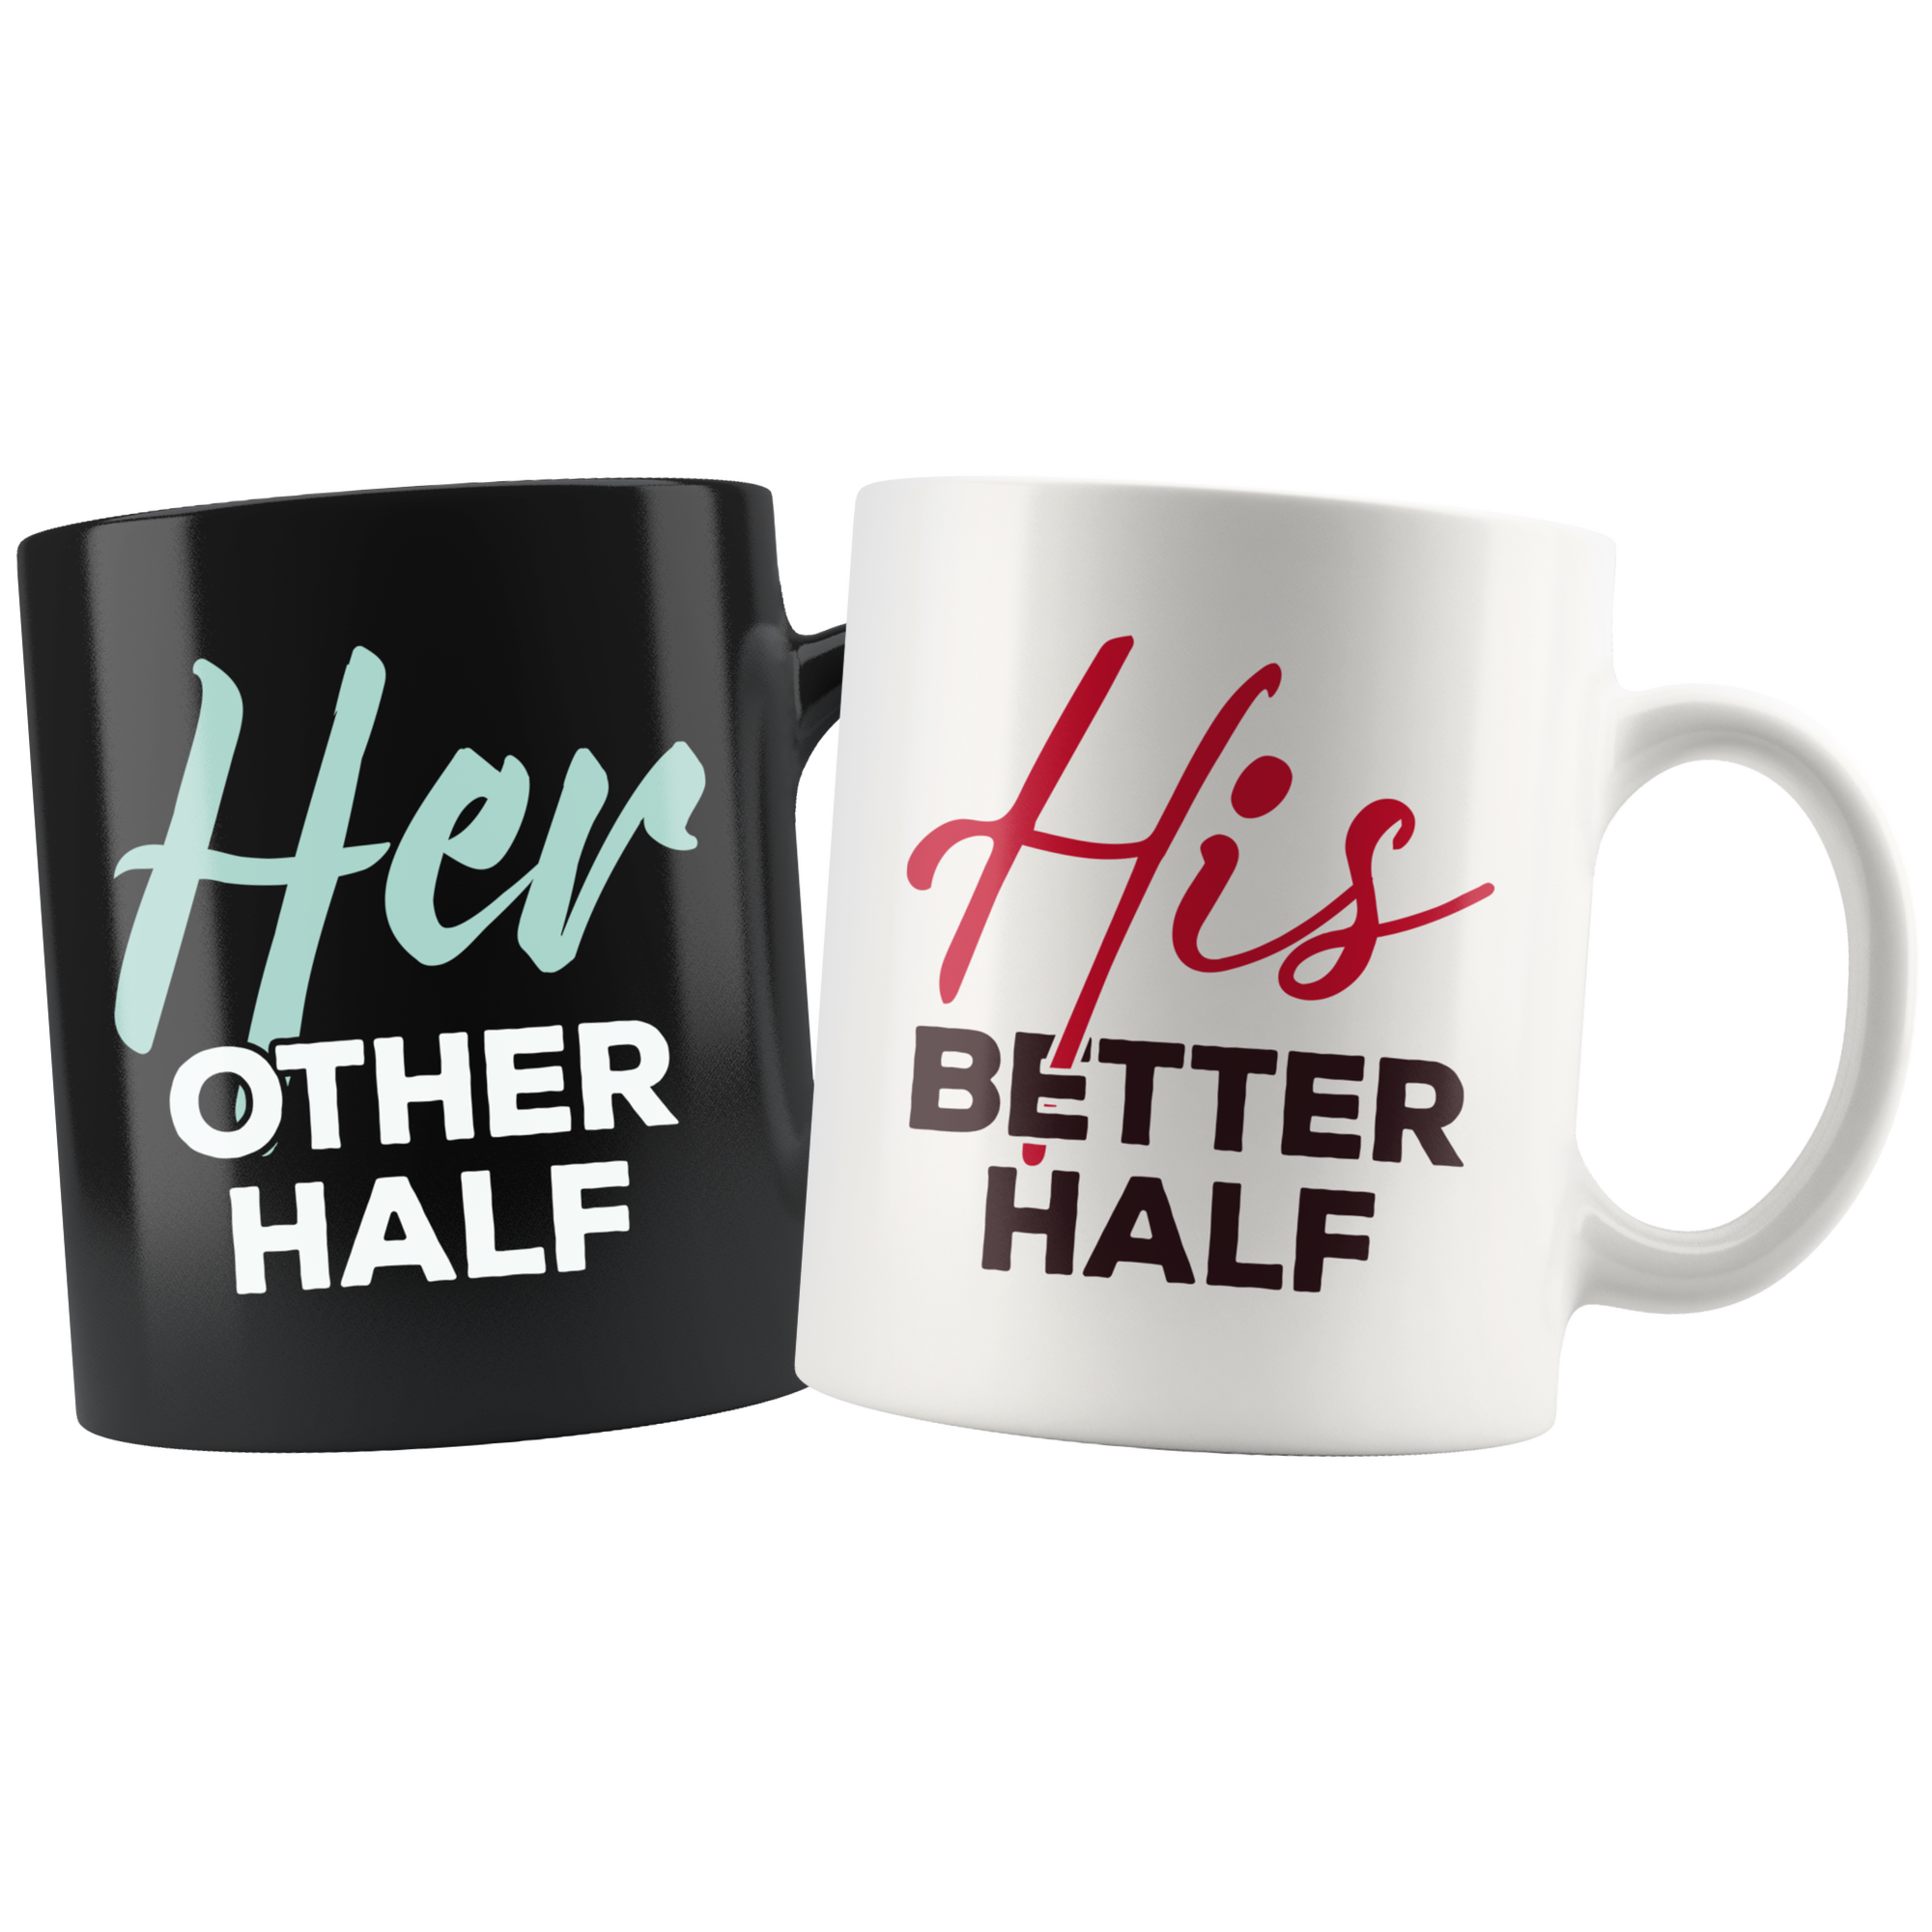 His Better Half Mug Her Other Half Cup Funny Couples Matching Mugs